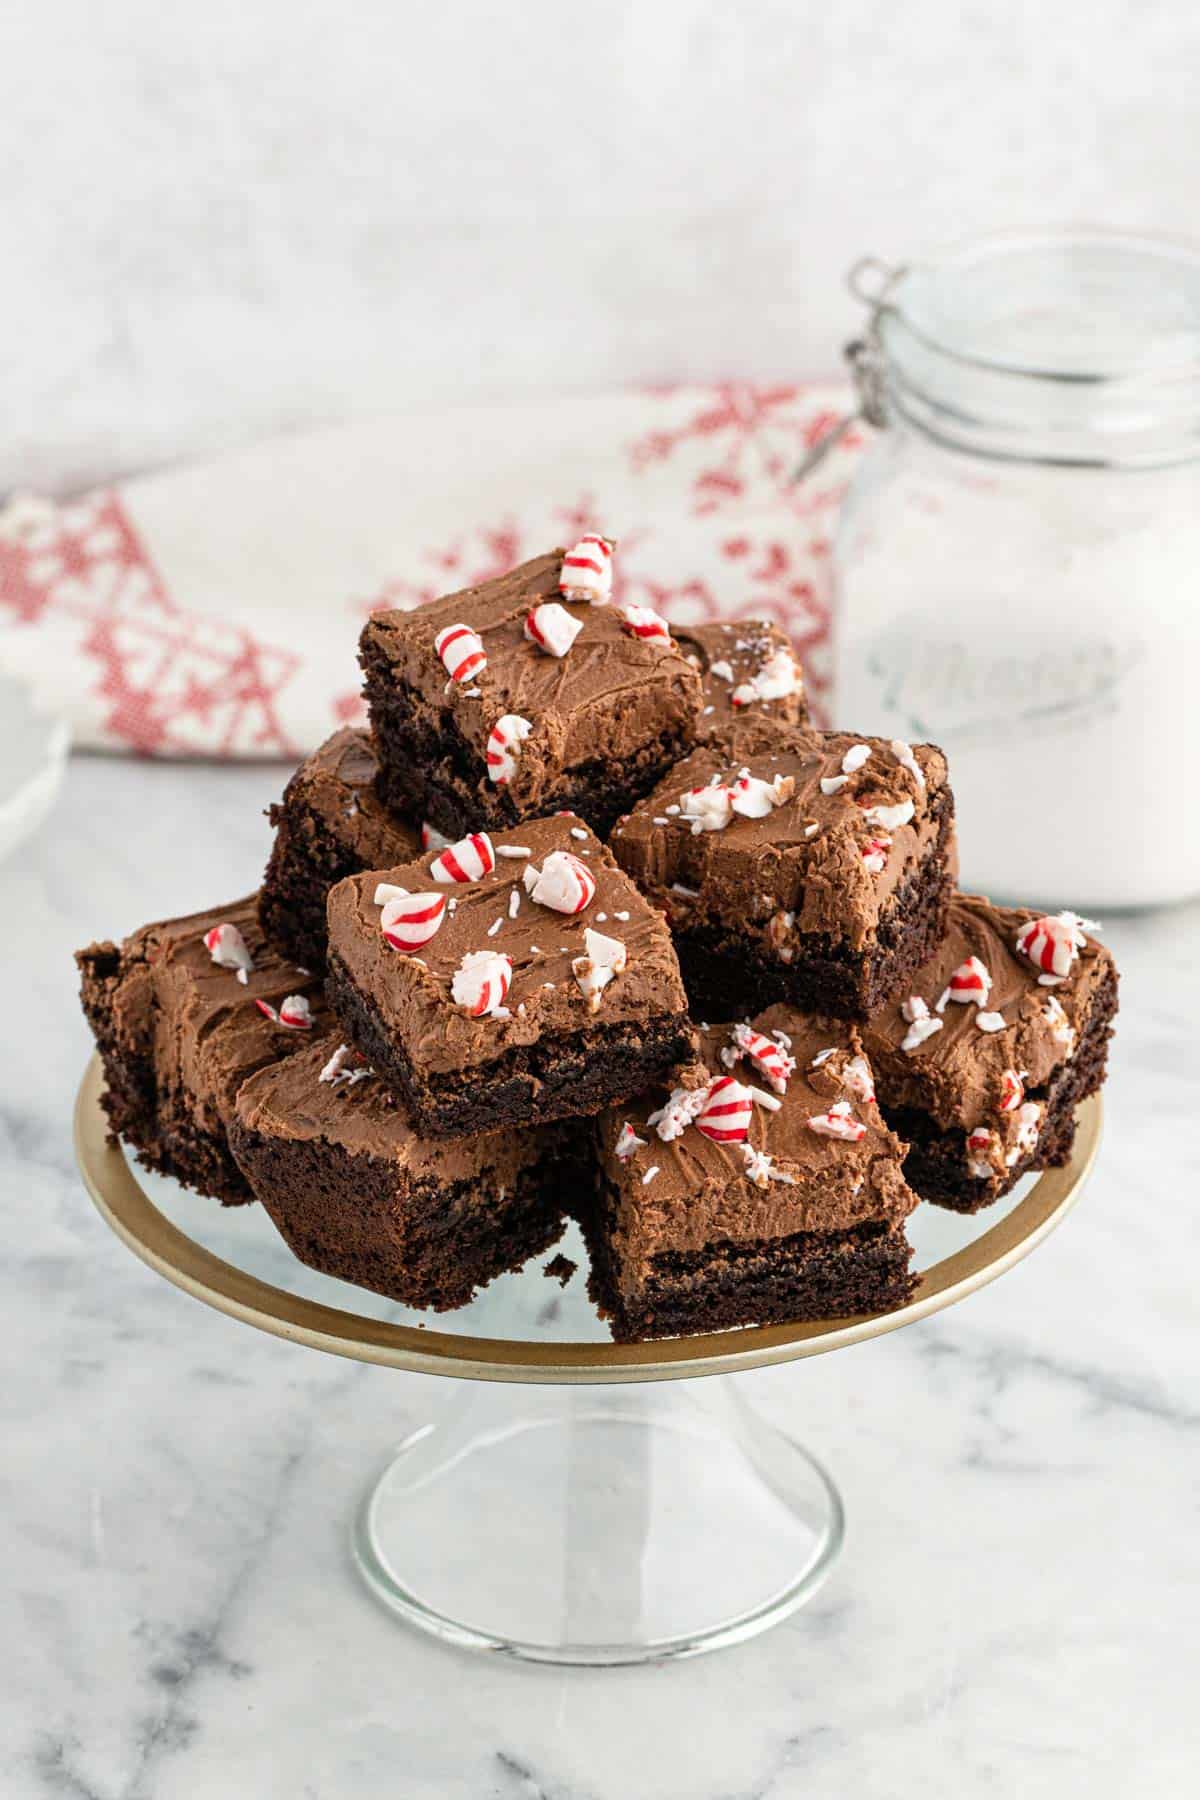 A platter of peppermint brownies on the table with a jar of sugar behind it and a white and red napkin.